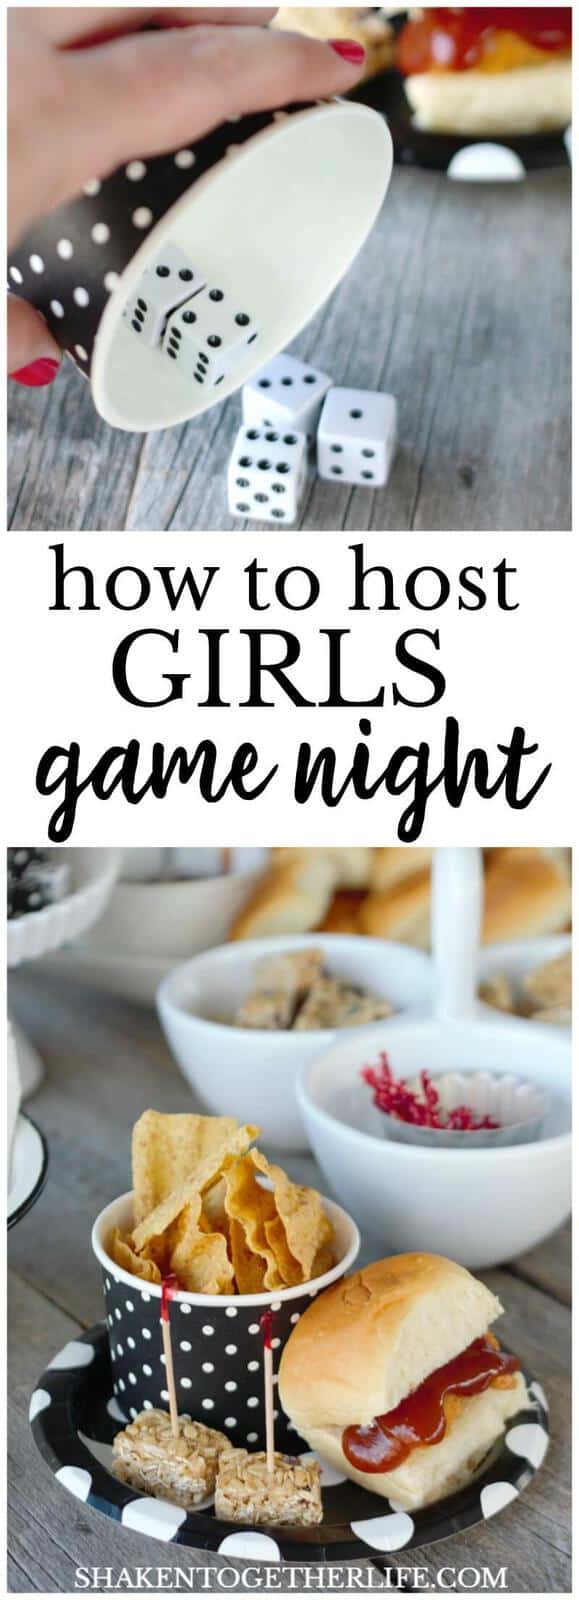 How to host Girls Game Night in 4 Easy Steps! Ideas for decor, food, games and more!